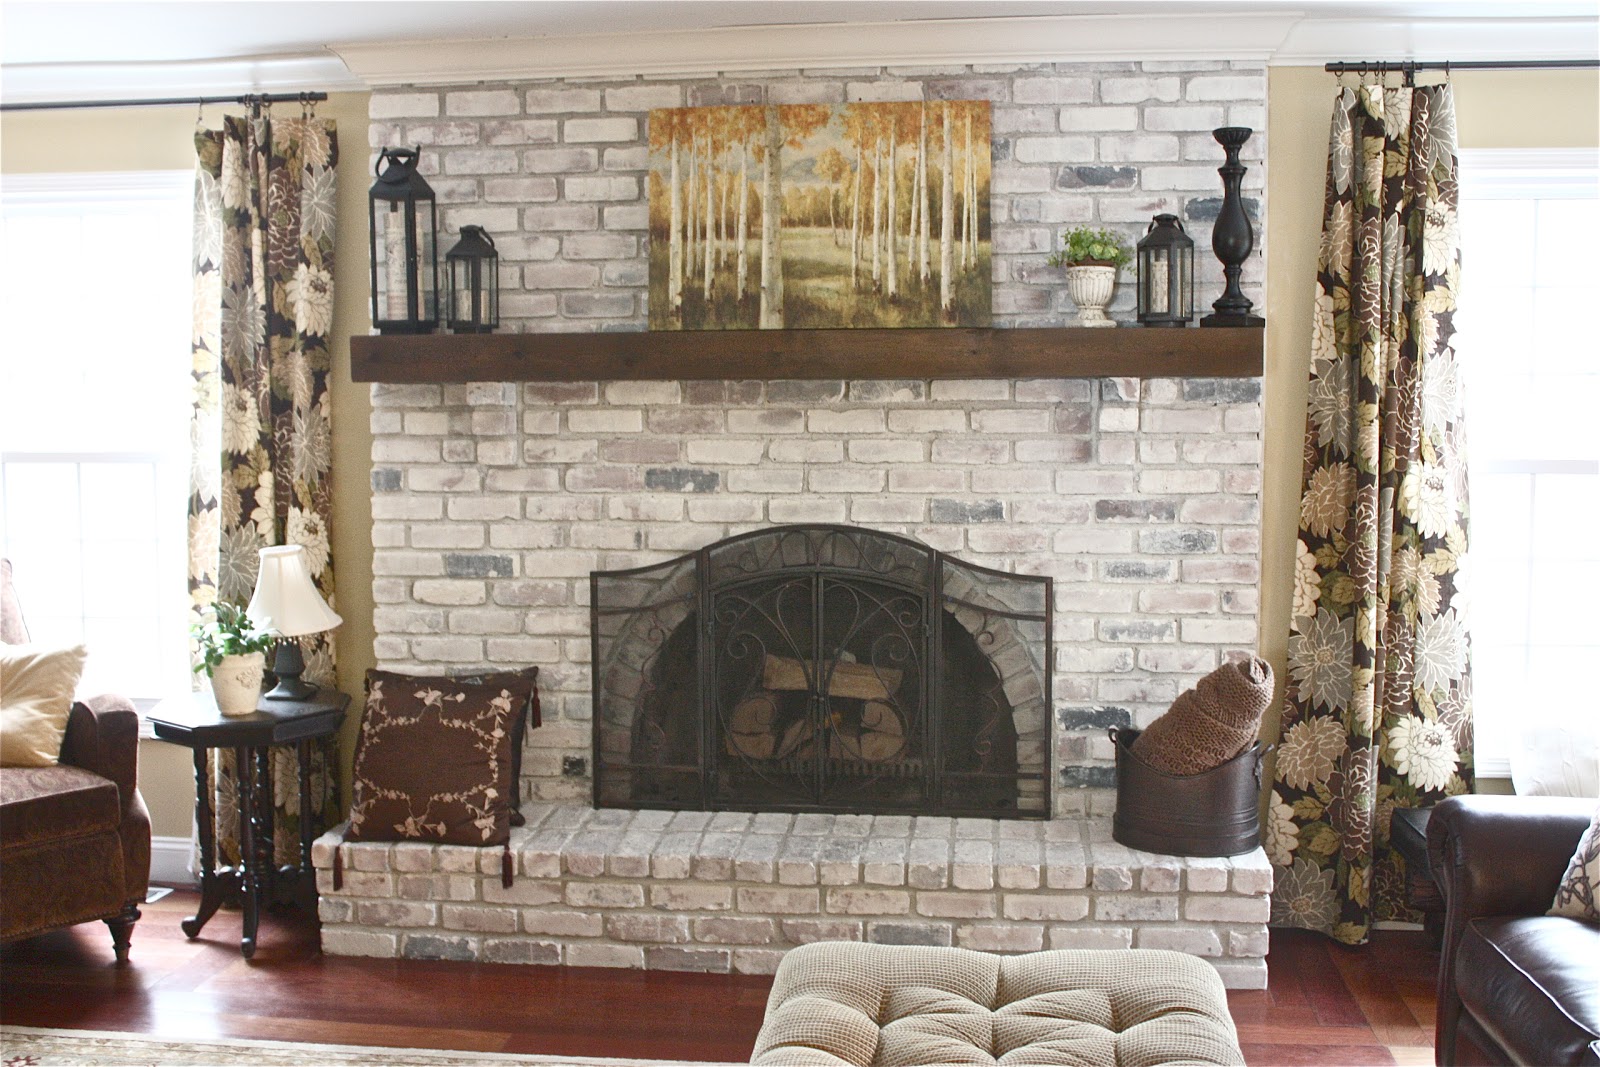 A Guide to Whitewashing Brick Fireplaces in Easy Steps